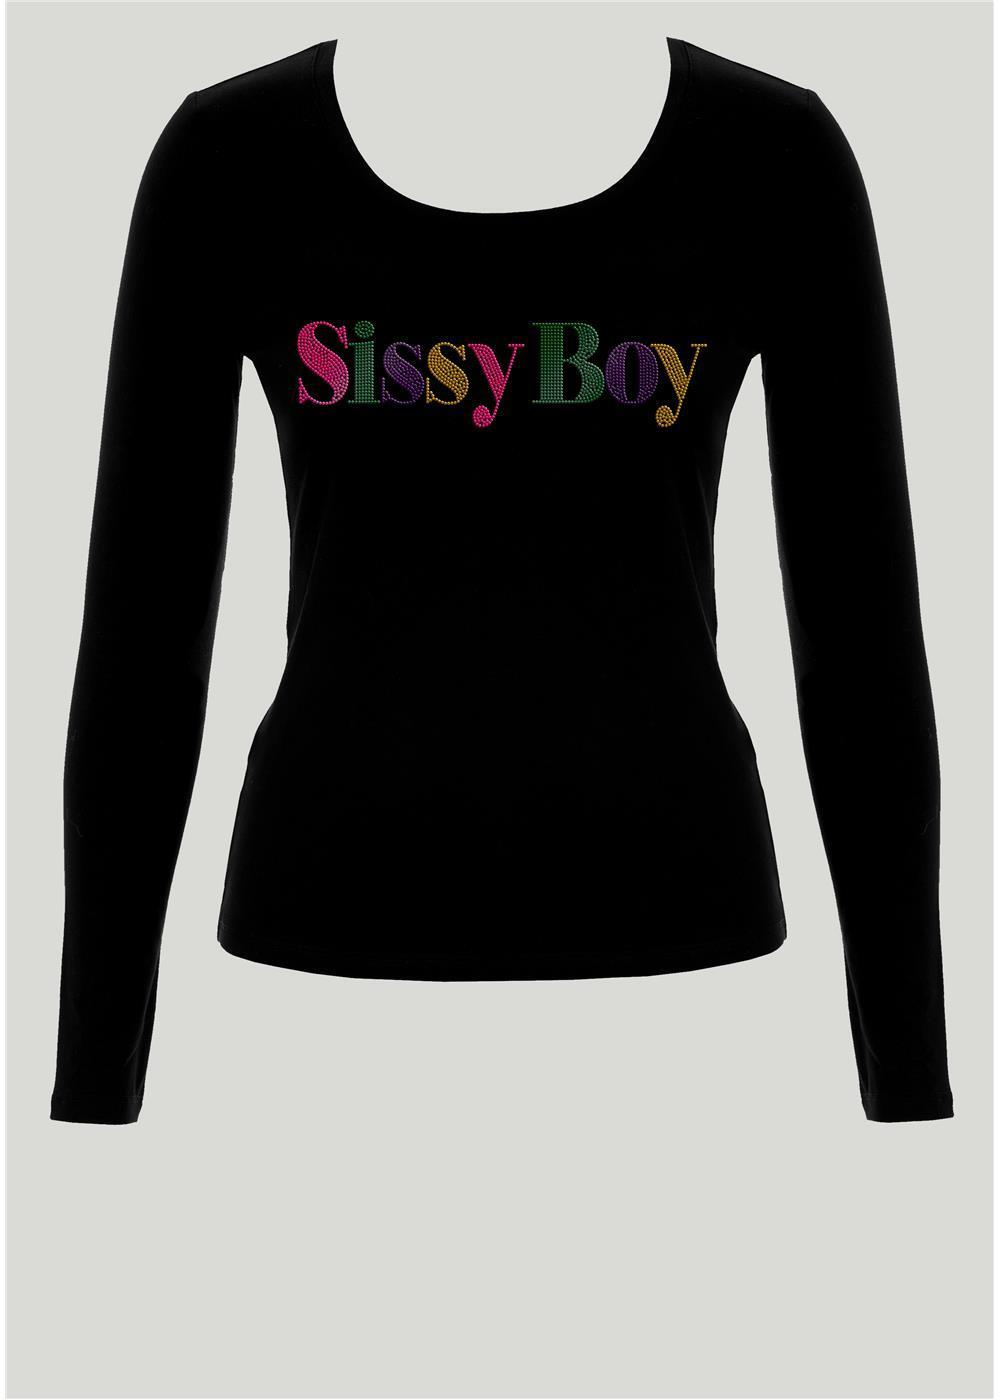 Sissyboy T30594 Fitted Colourful Bling Long Top  Black